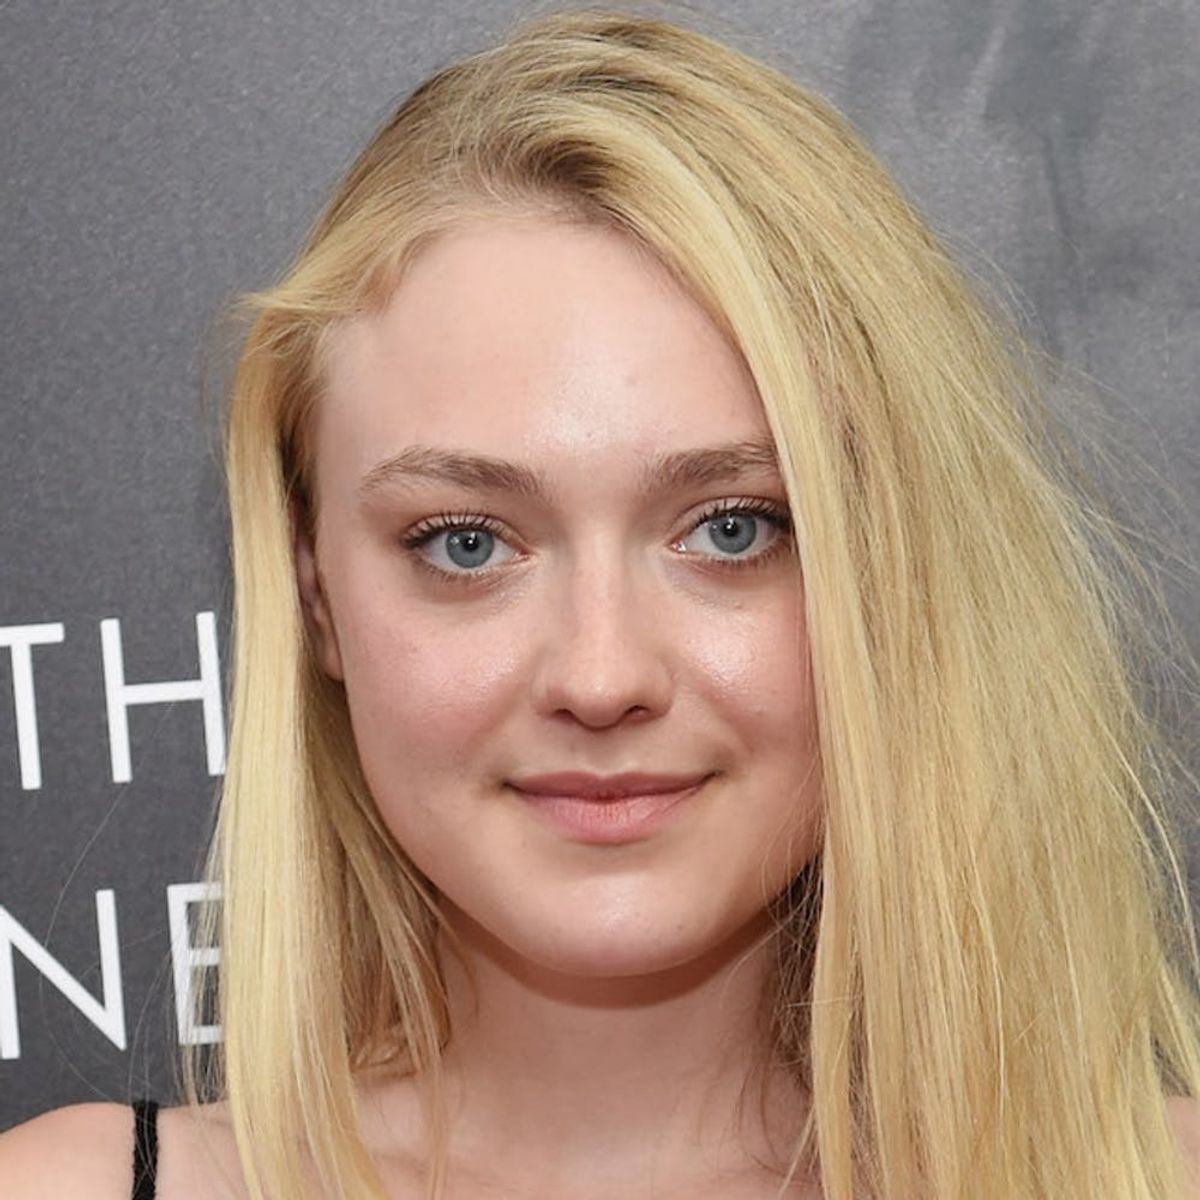 Dakota Fanning’s Rose Gold Sunnies Are the Late-Summer Accessory You’ll NEED